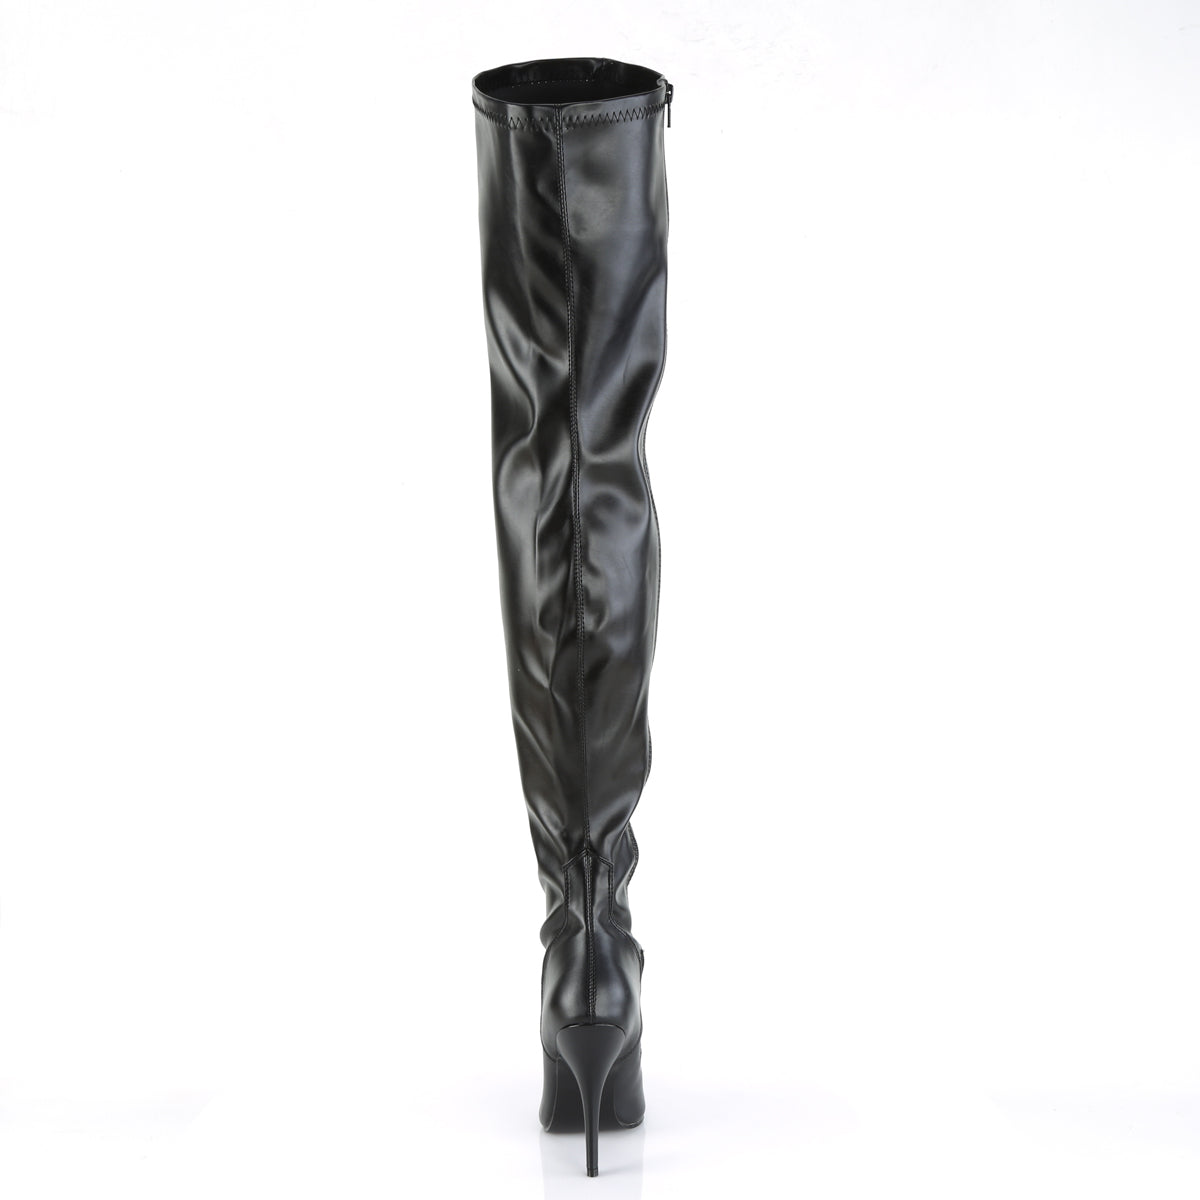 SEDUCE-3000 / B / PU 5 "PLEASER FAST DELIVERY 24-48h 